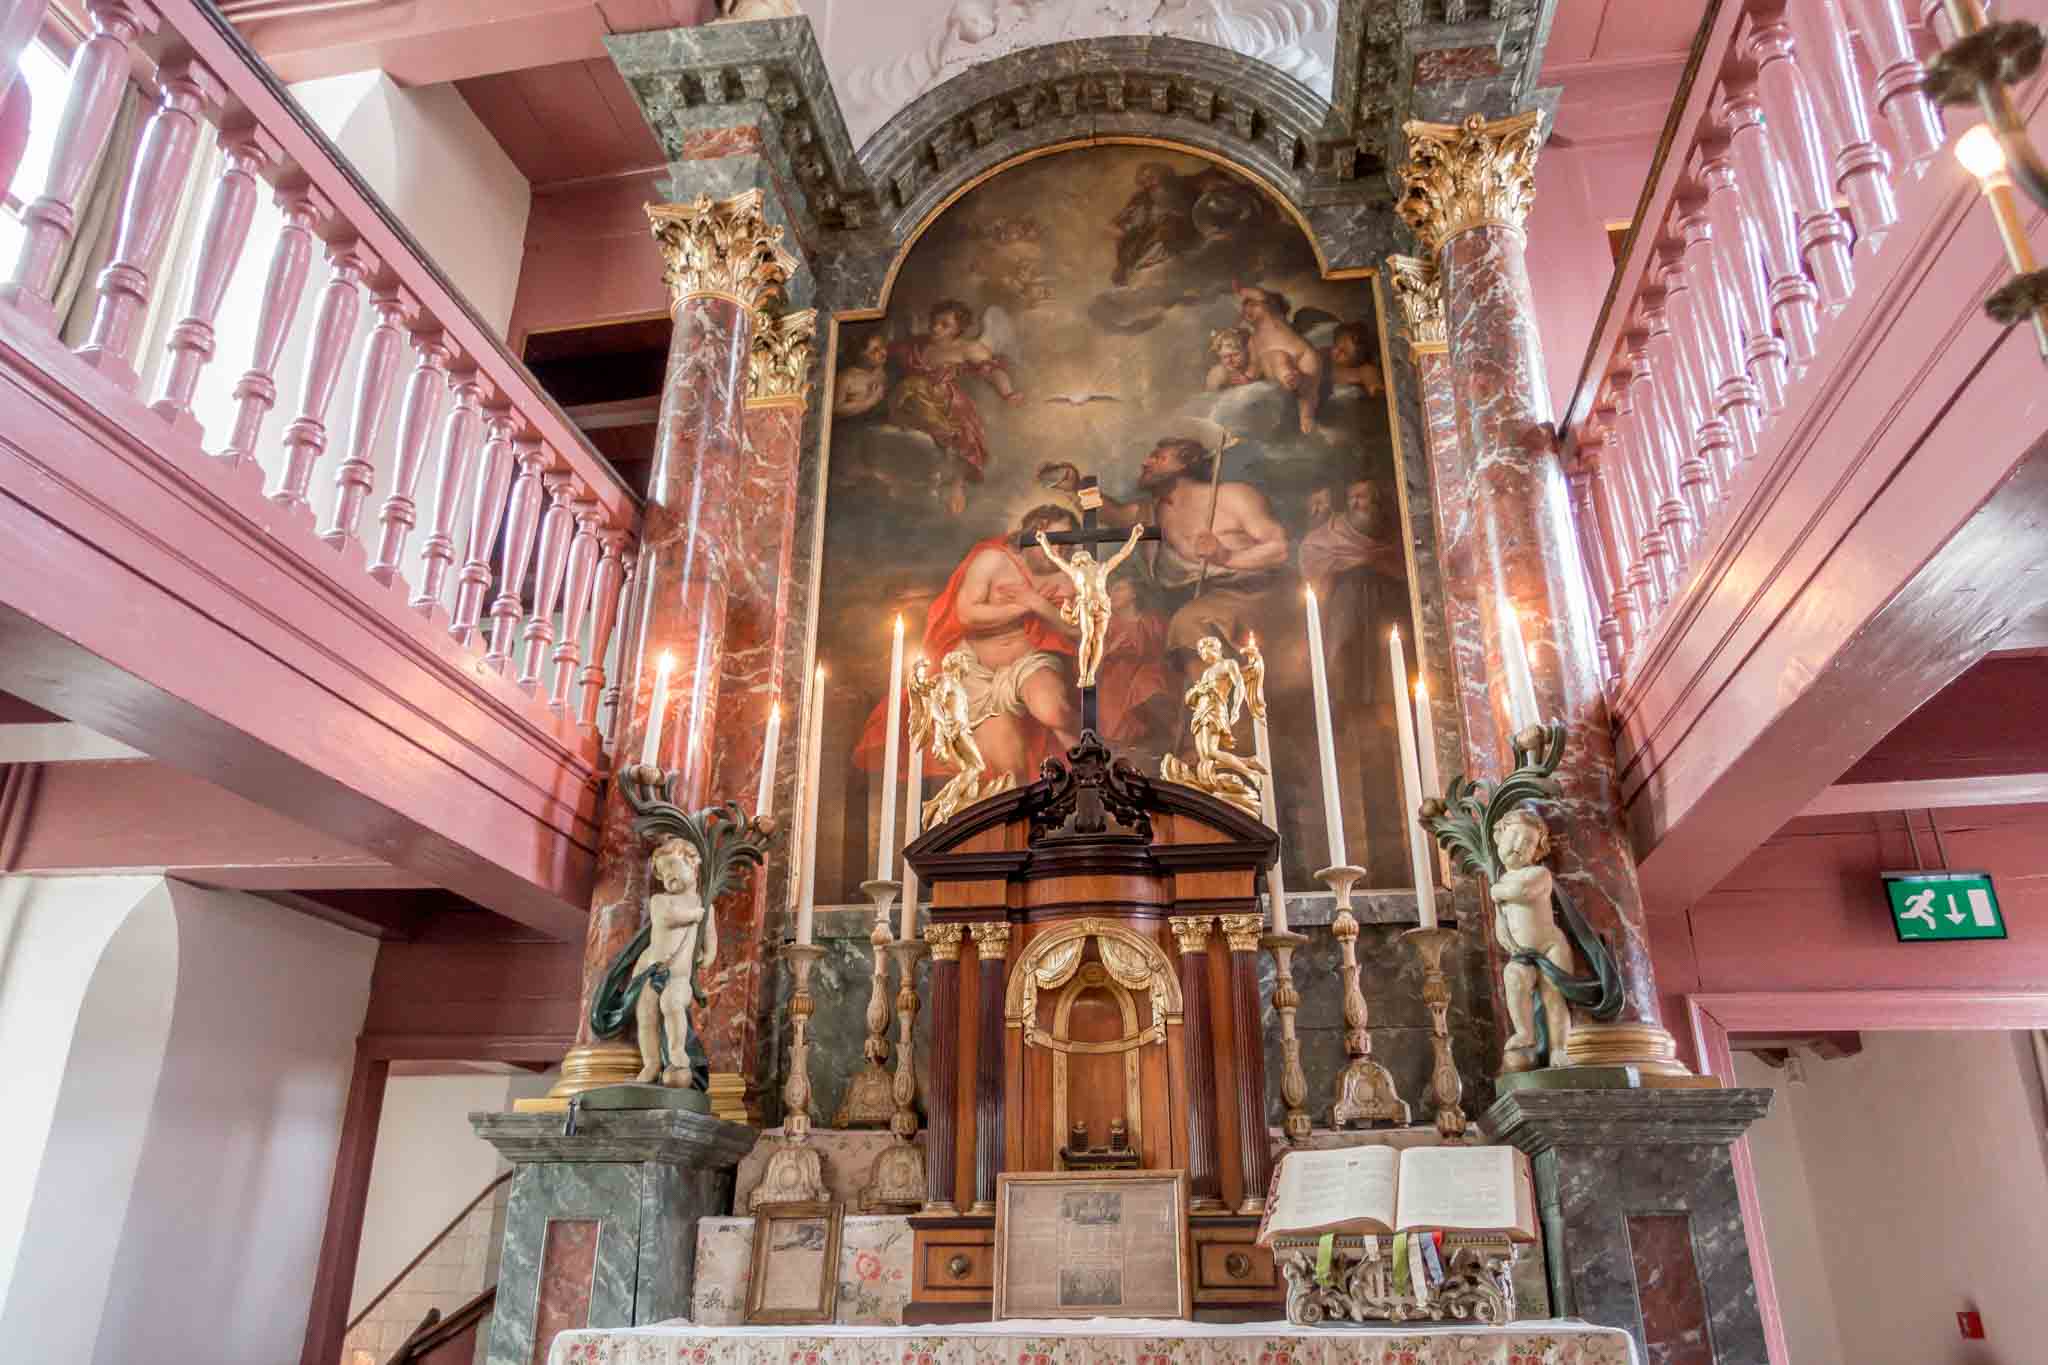 Altar and religious painting in a sanctuary